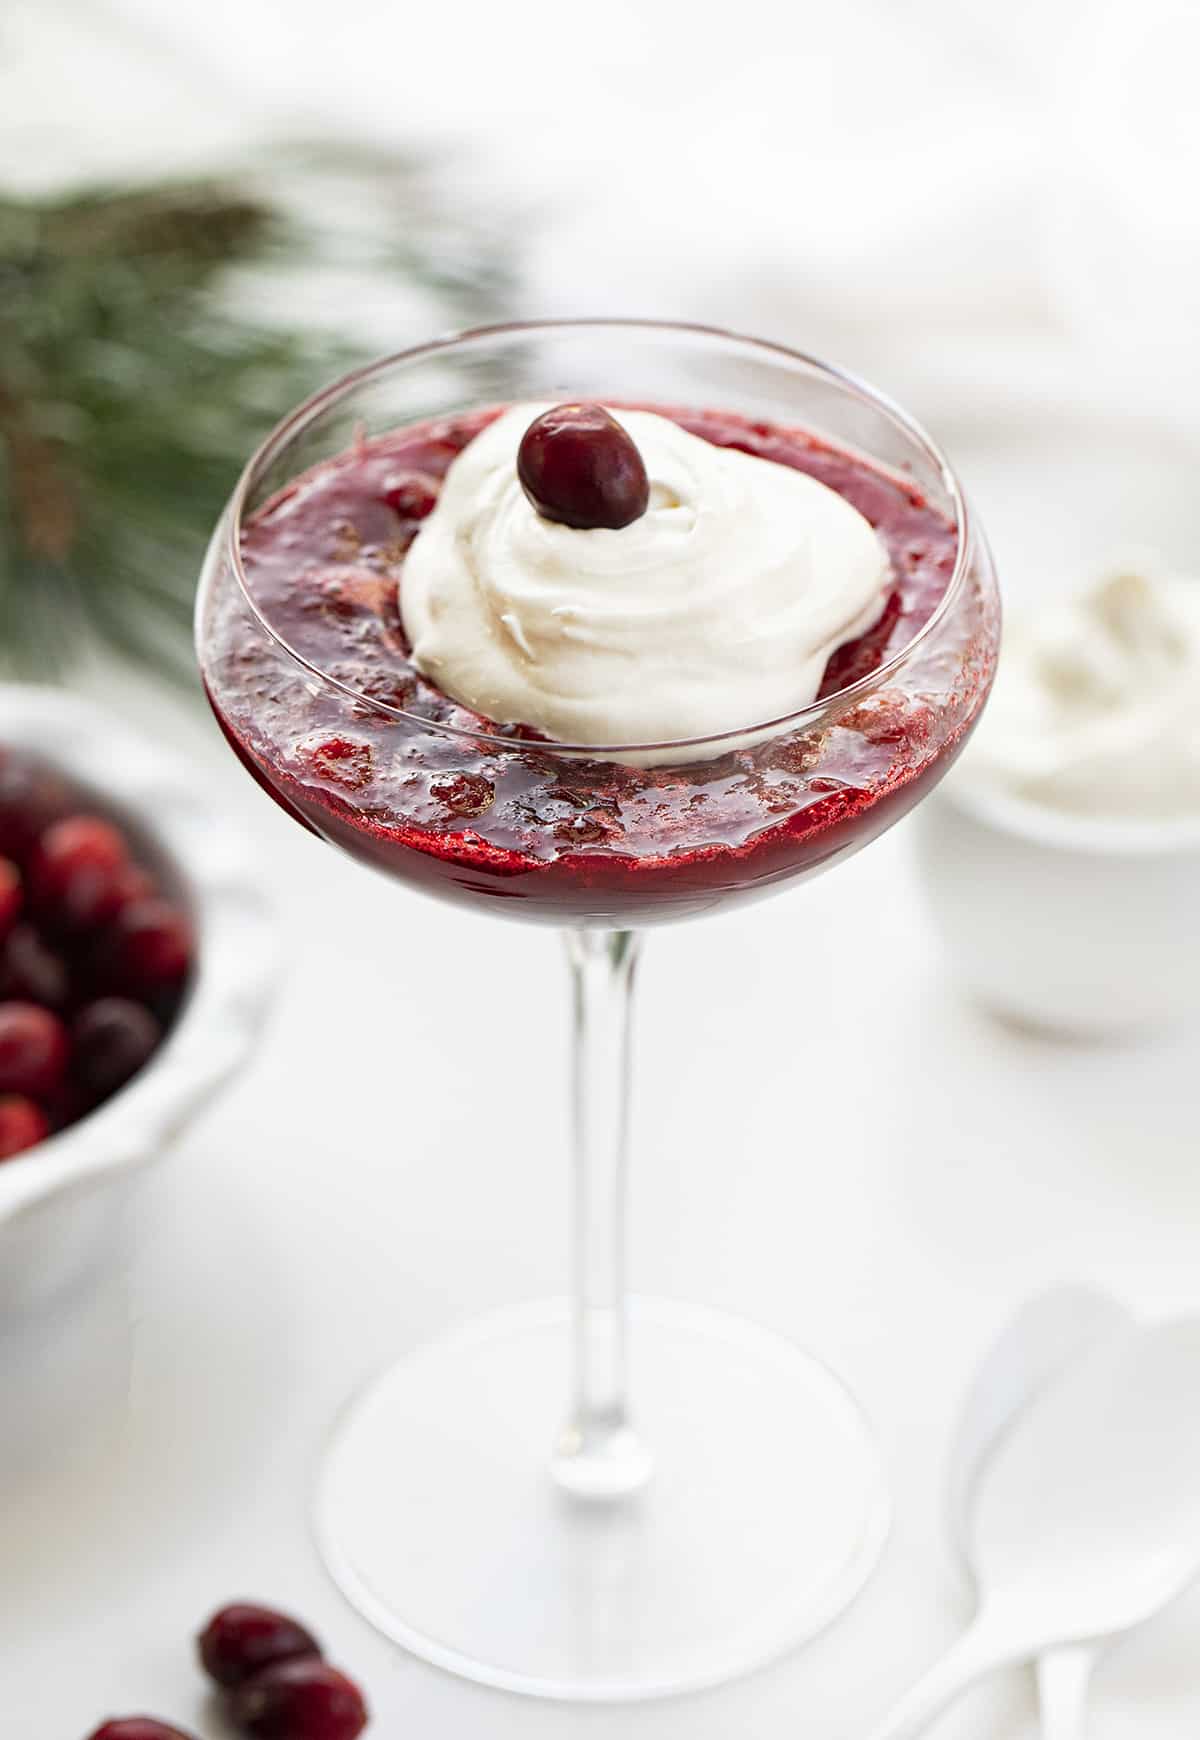 Cranberries in Snow Desserts on a White Counter with Cranberries and Pine. Dessert, Holiday Dessert, Christmas Dessert, Thanksgiving Dessert, No Bake Desserts, Cream Cheese Whipped Cream, Cranberry Desserts, i am baker, iambaker